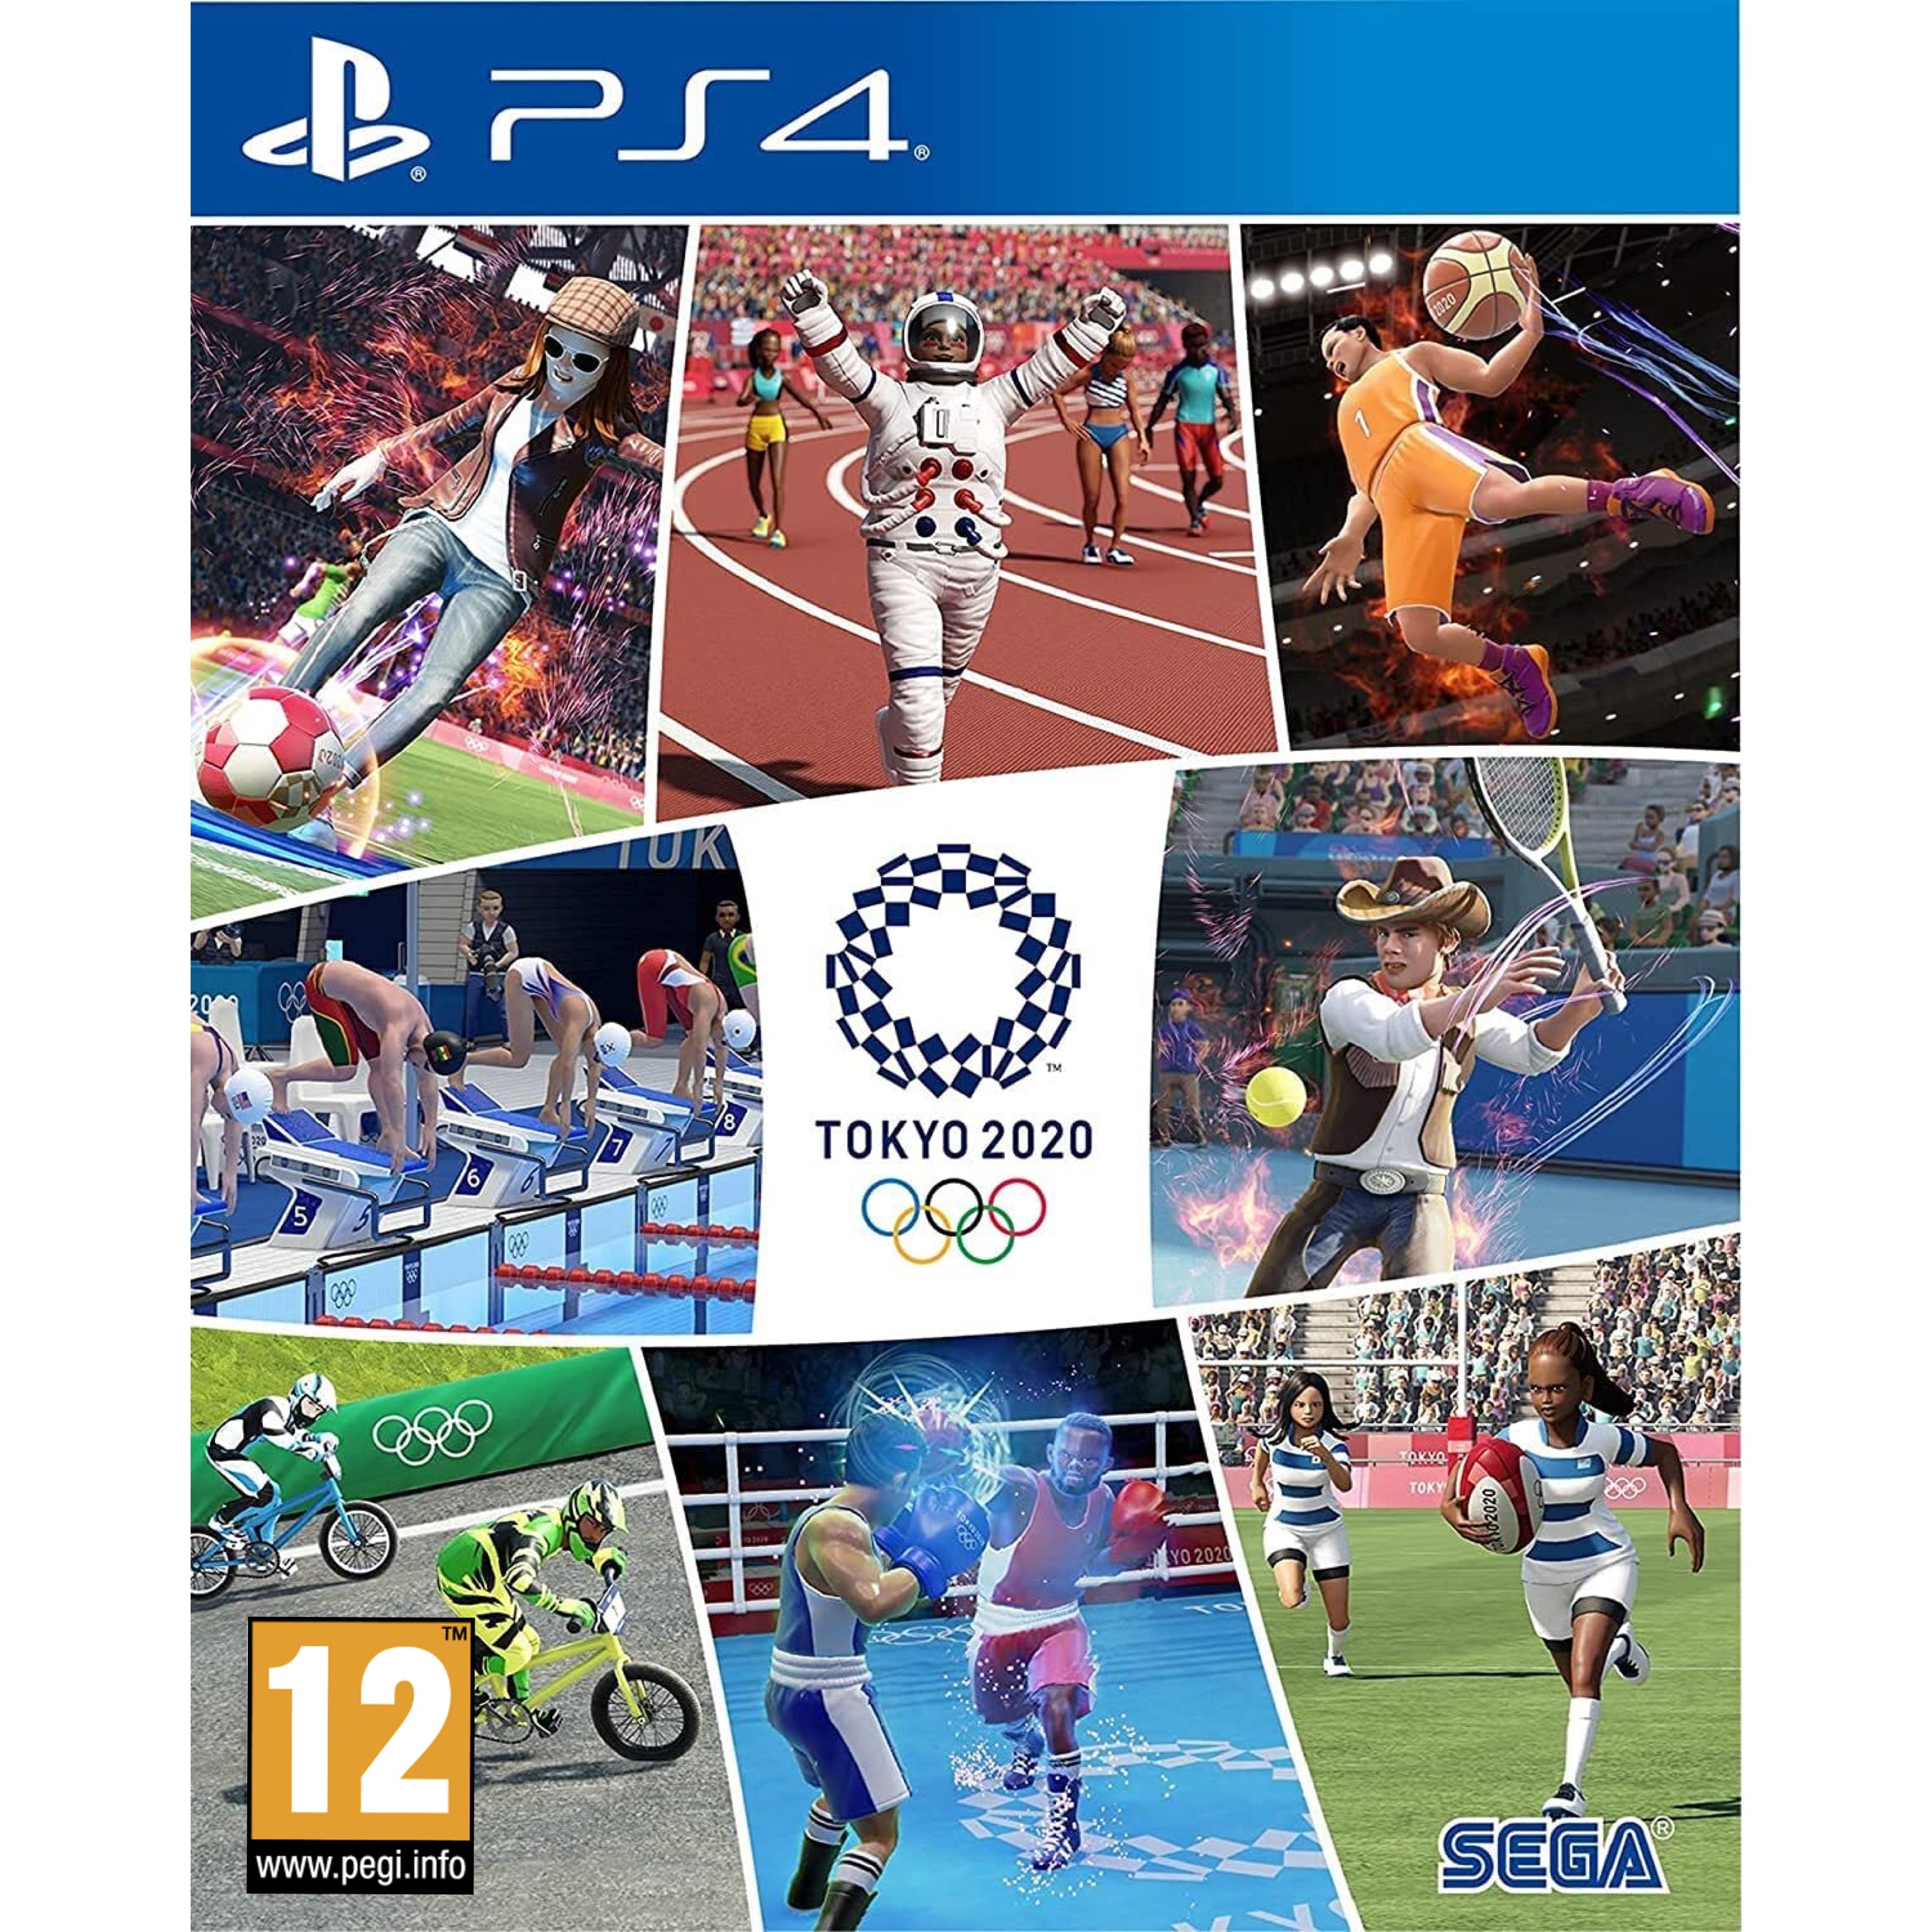 Tokyo 2020 Olympic Games For PlayStation 4 “Region 2” - Level Up